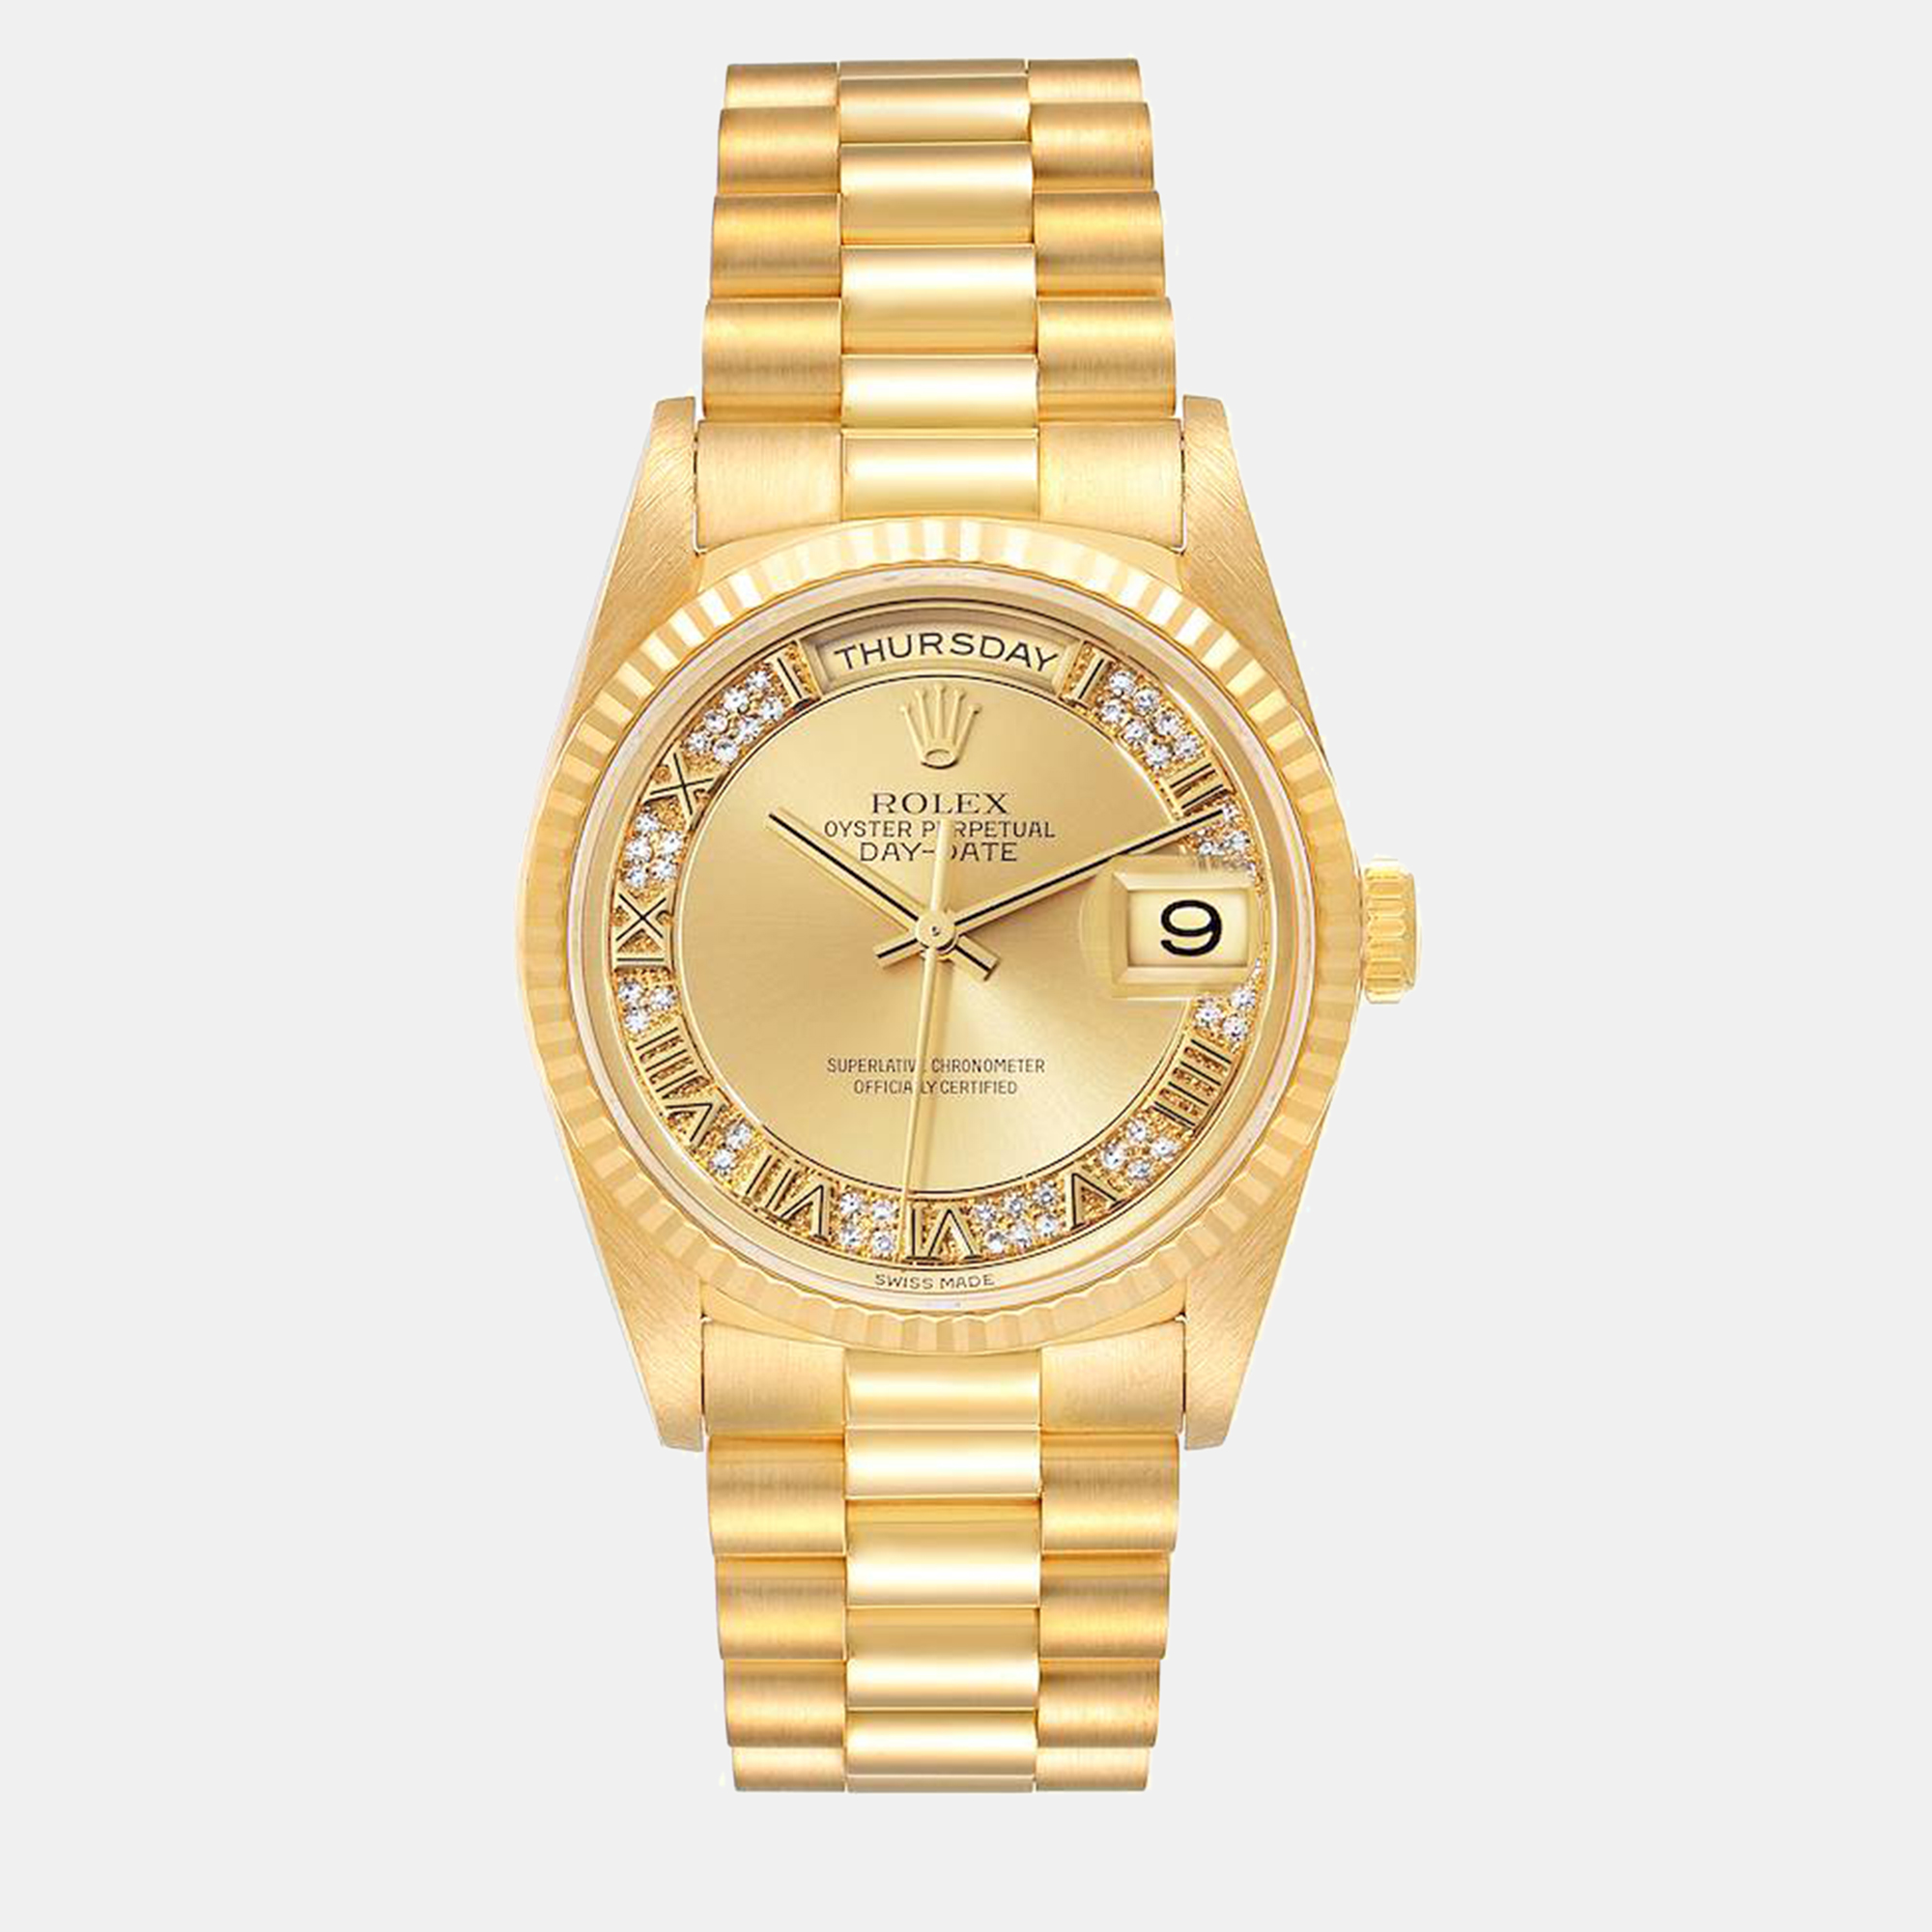 Let this authentic Rolex timepiece help you make every moment count Created with skill using high grade materials this watch is a functional accessory designed to impart a luxurious style while keeping you on time.